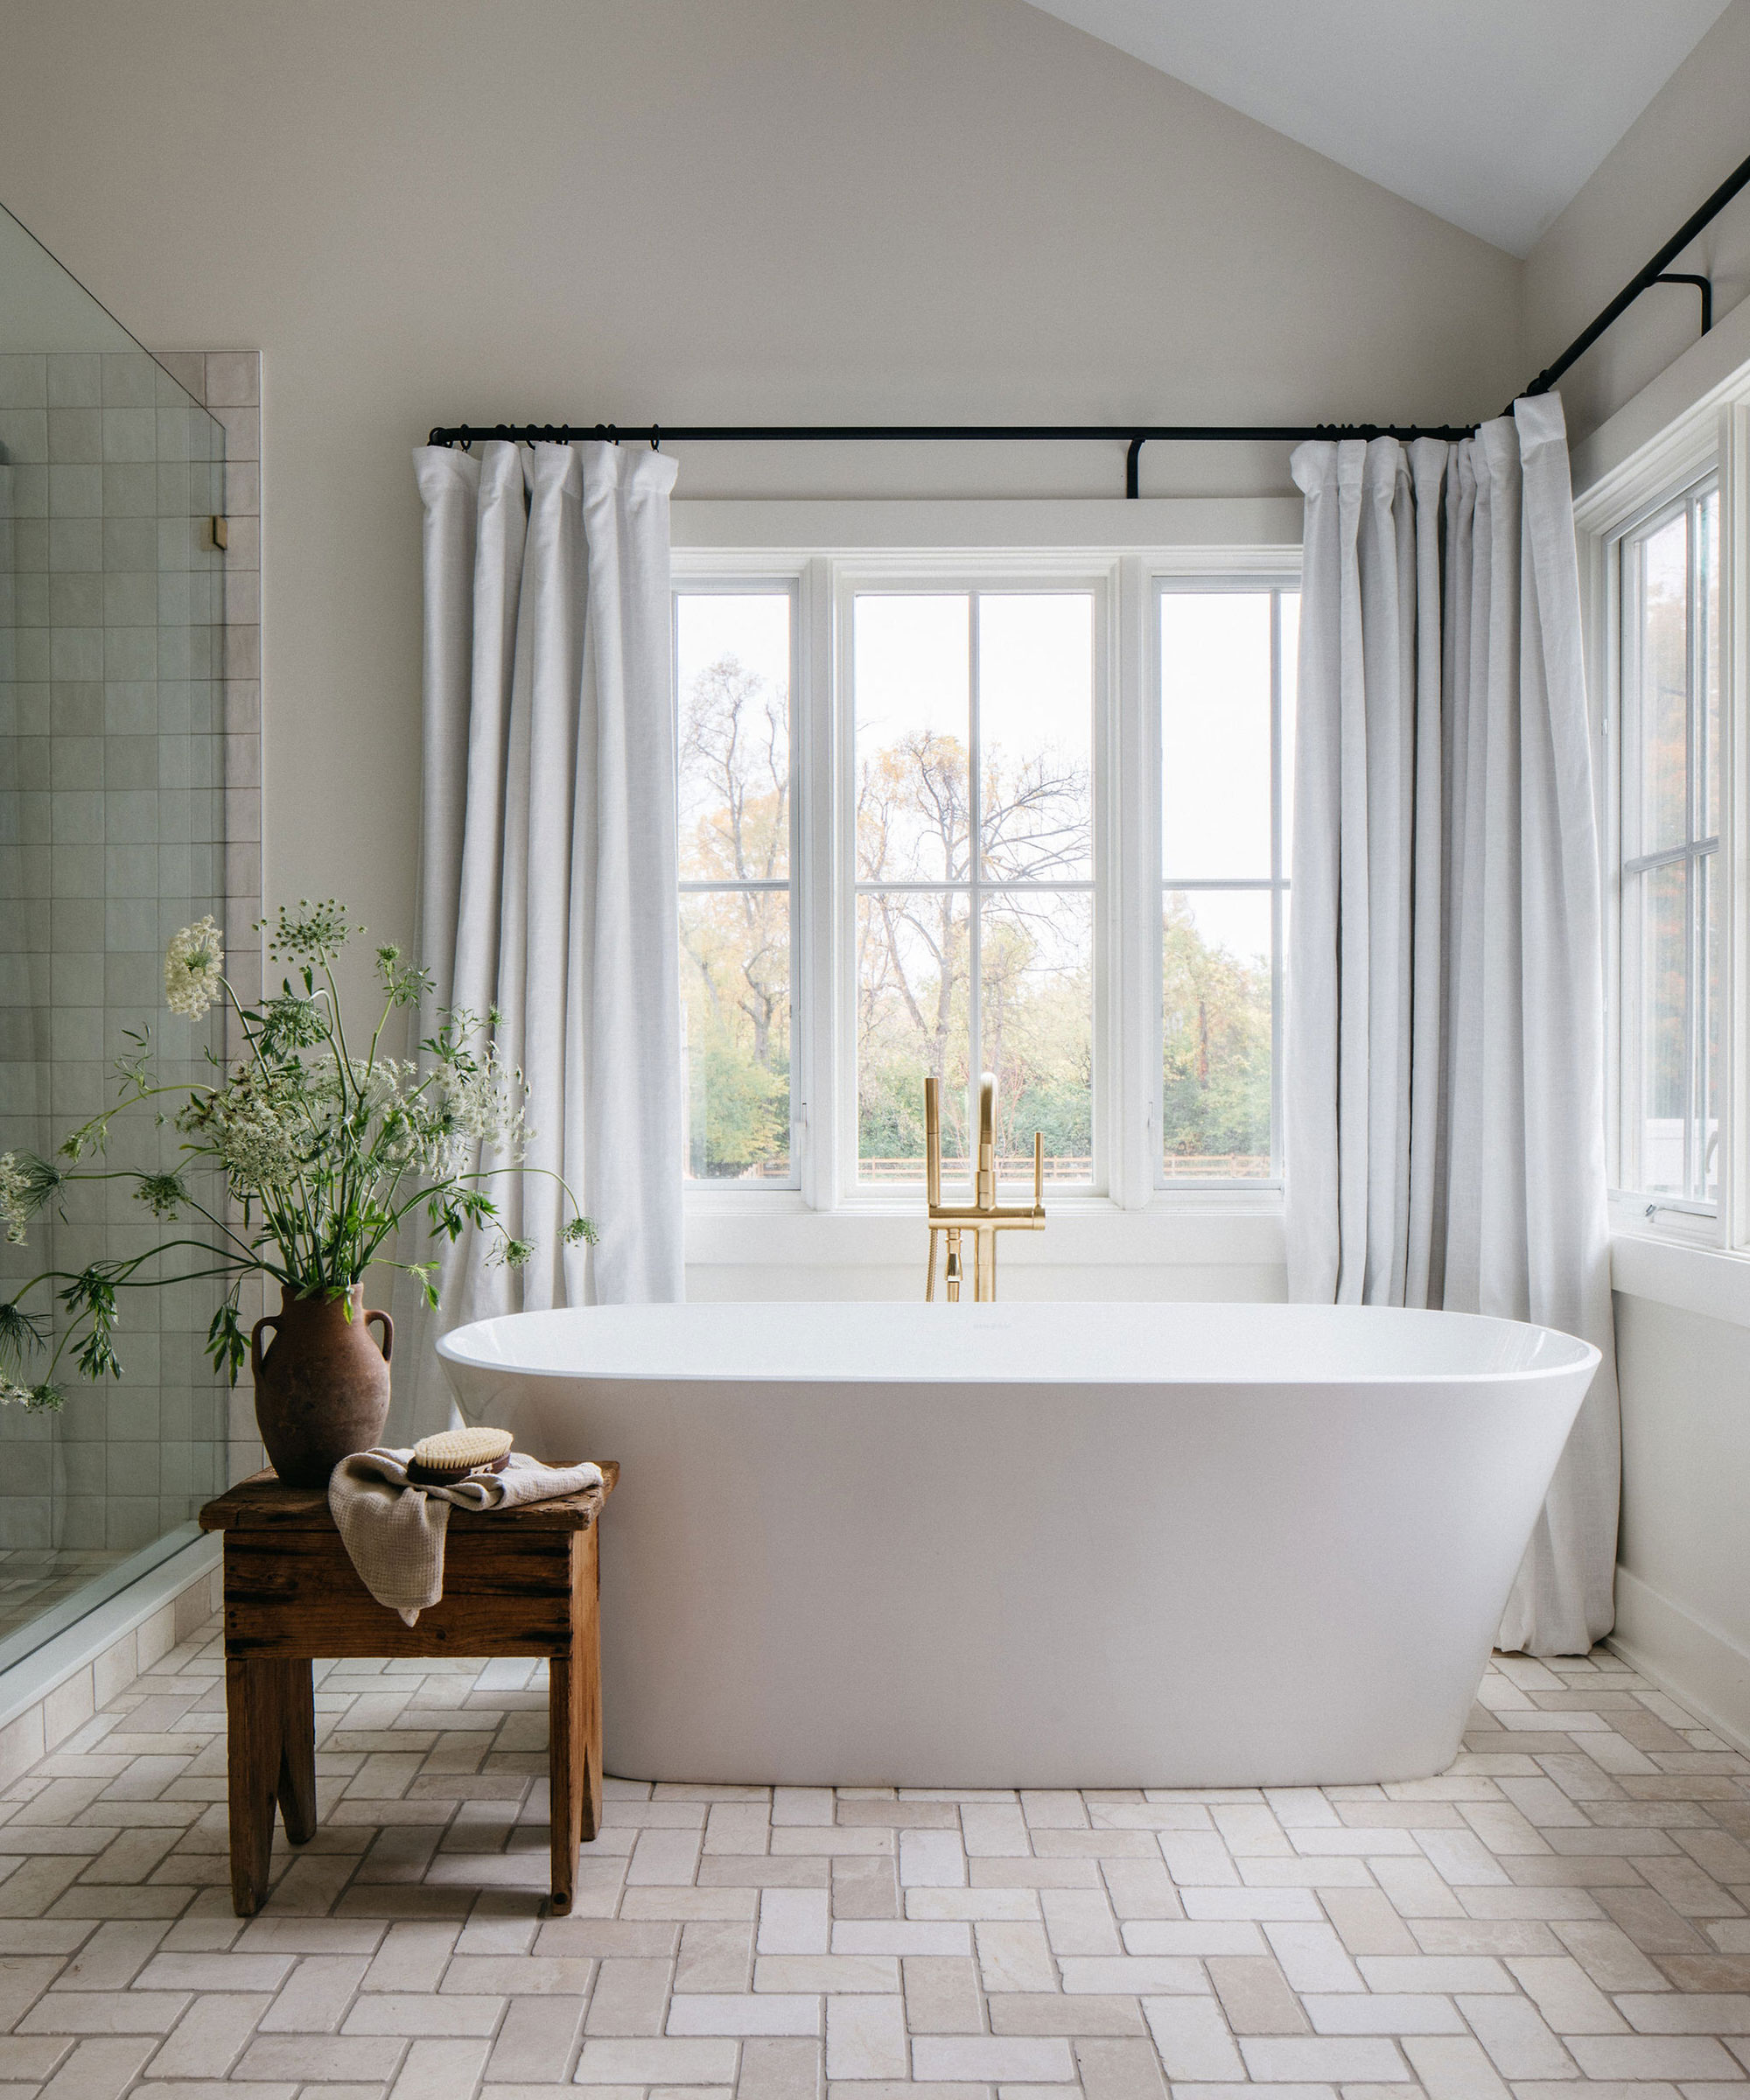 Neutral bathroom with white tub, matching square floor and shower tile and light drapes with landscape setting beyond window